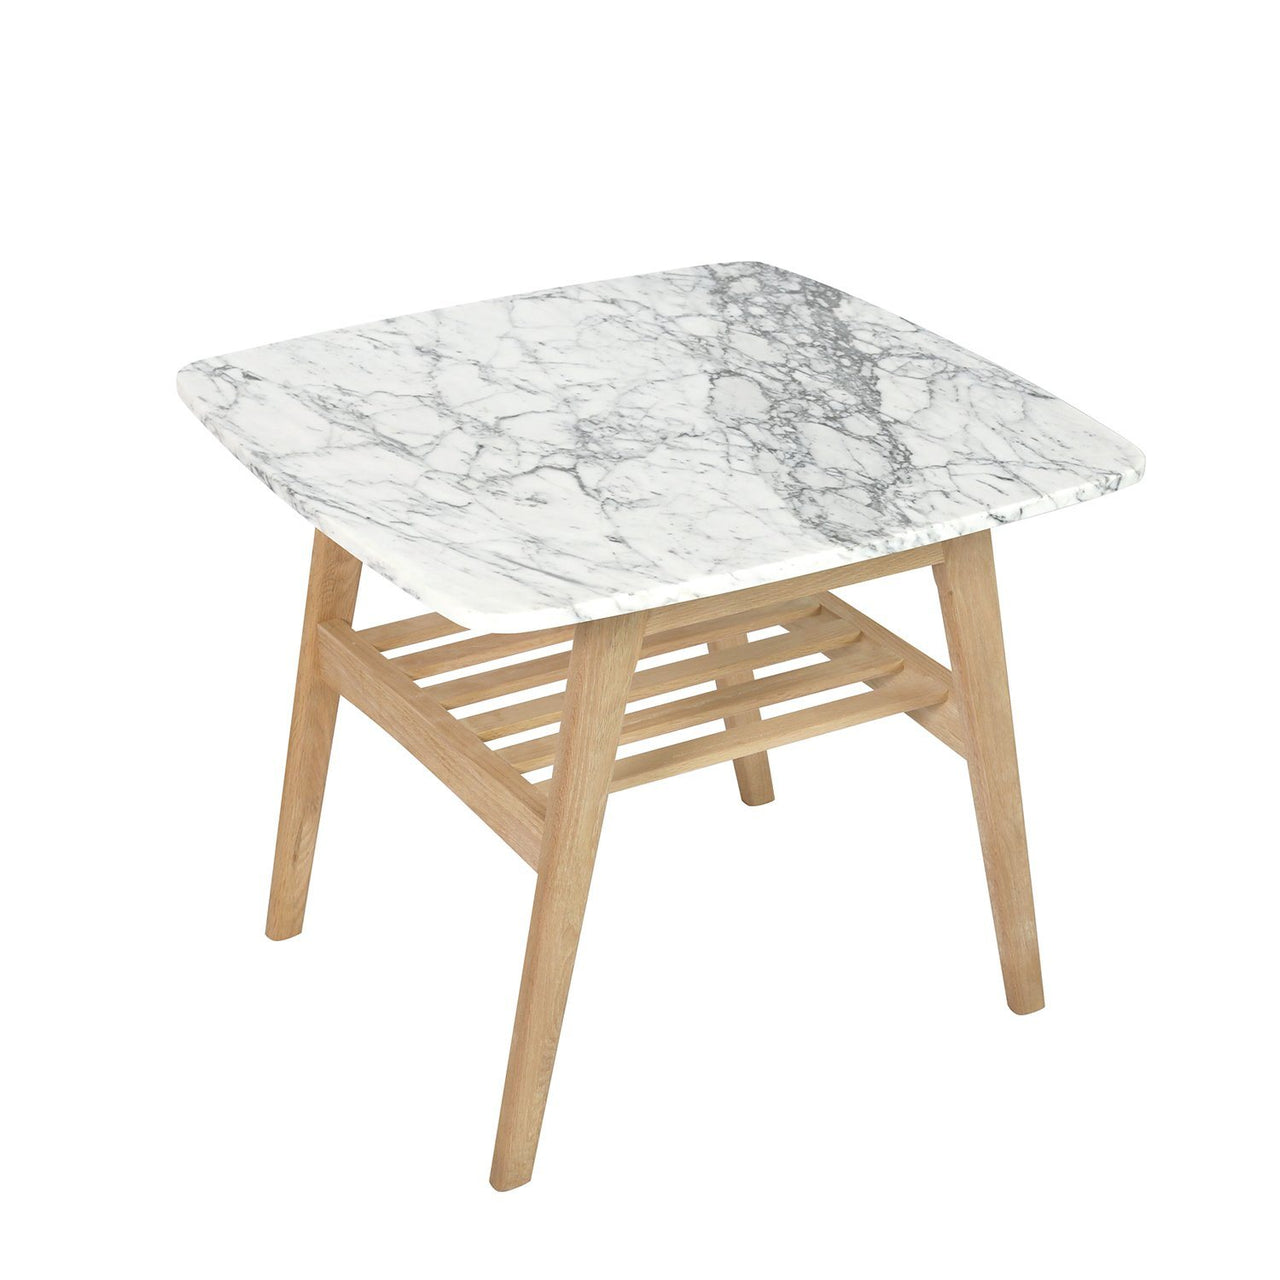 Cassoro 24" Square Italian Carrara White Marble Side Table with Shelf Side Table The Bianco Collection Oak 